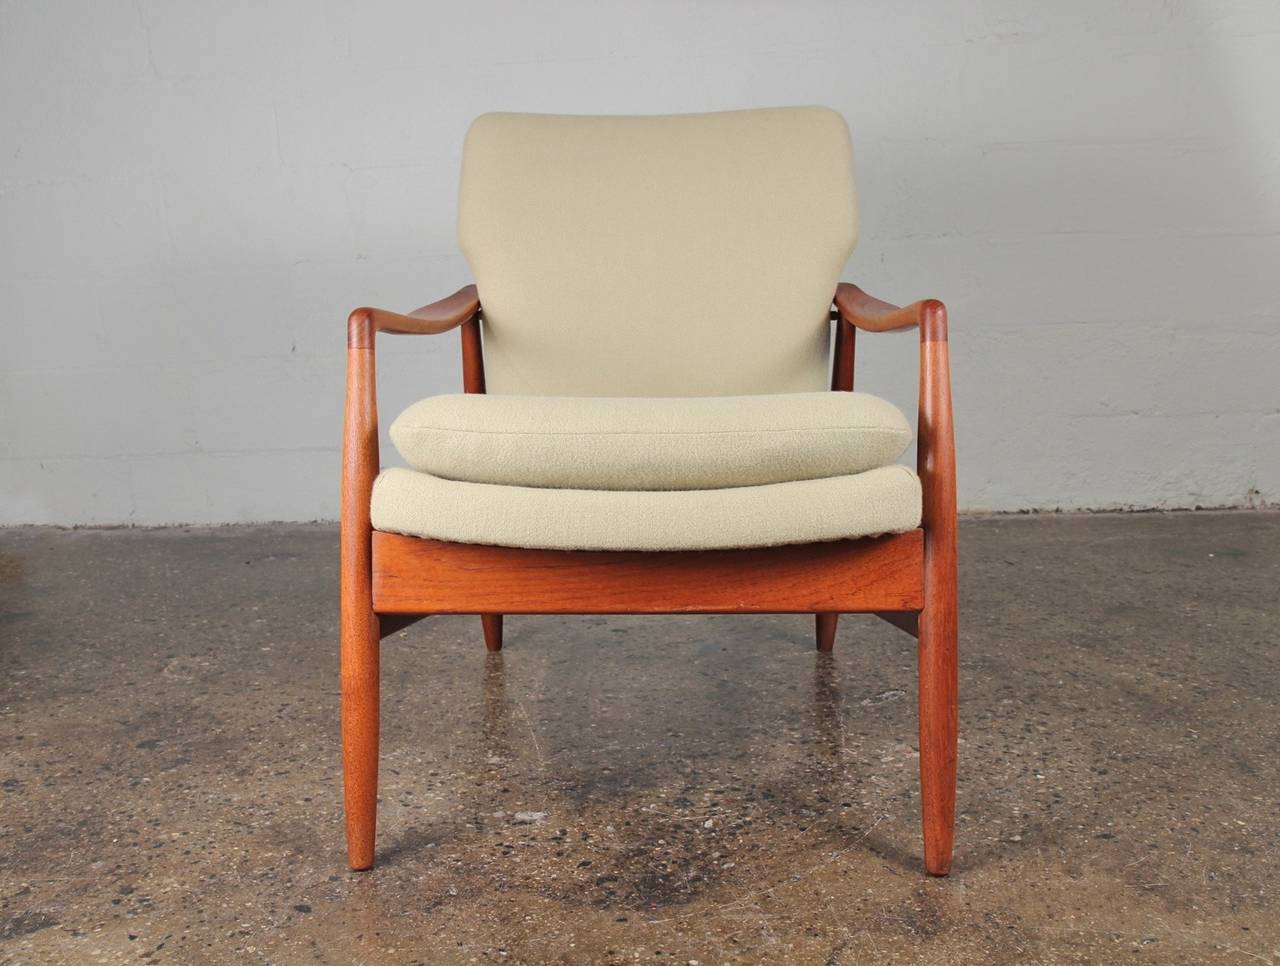 Finely sculpted Danish modern armchair, newly upholstered in pale celadon Tonus wool. Elegant, tapered lines create a sophisticated form that's also quite comfortable. In excellent vintage condition, 1960s.

Measures: 25.5